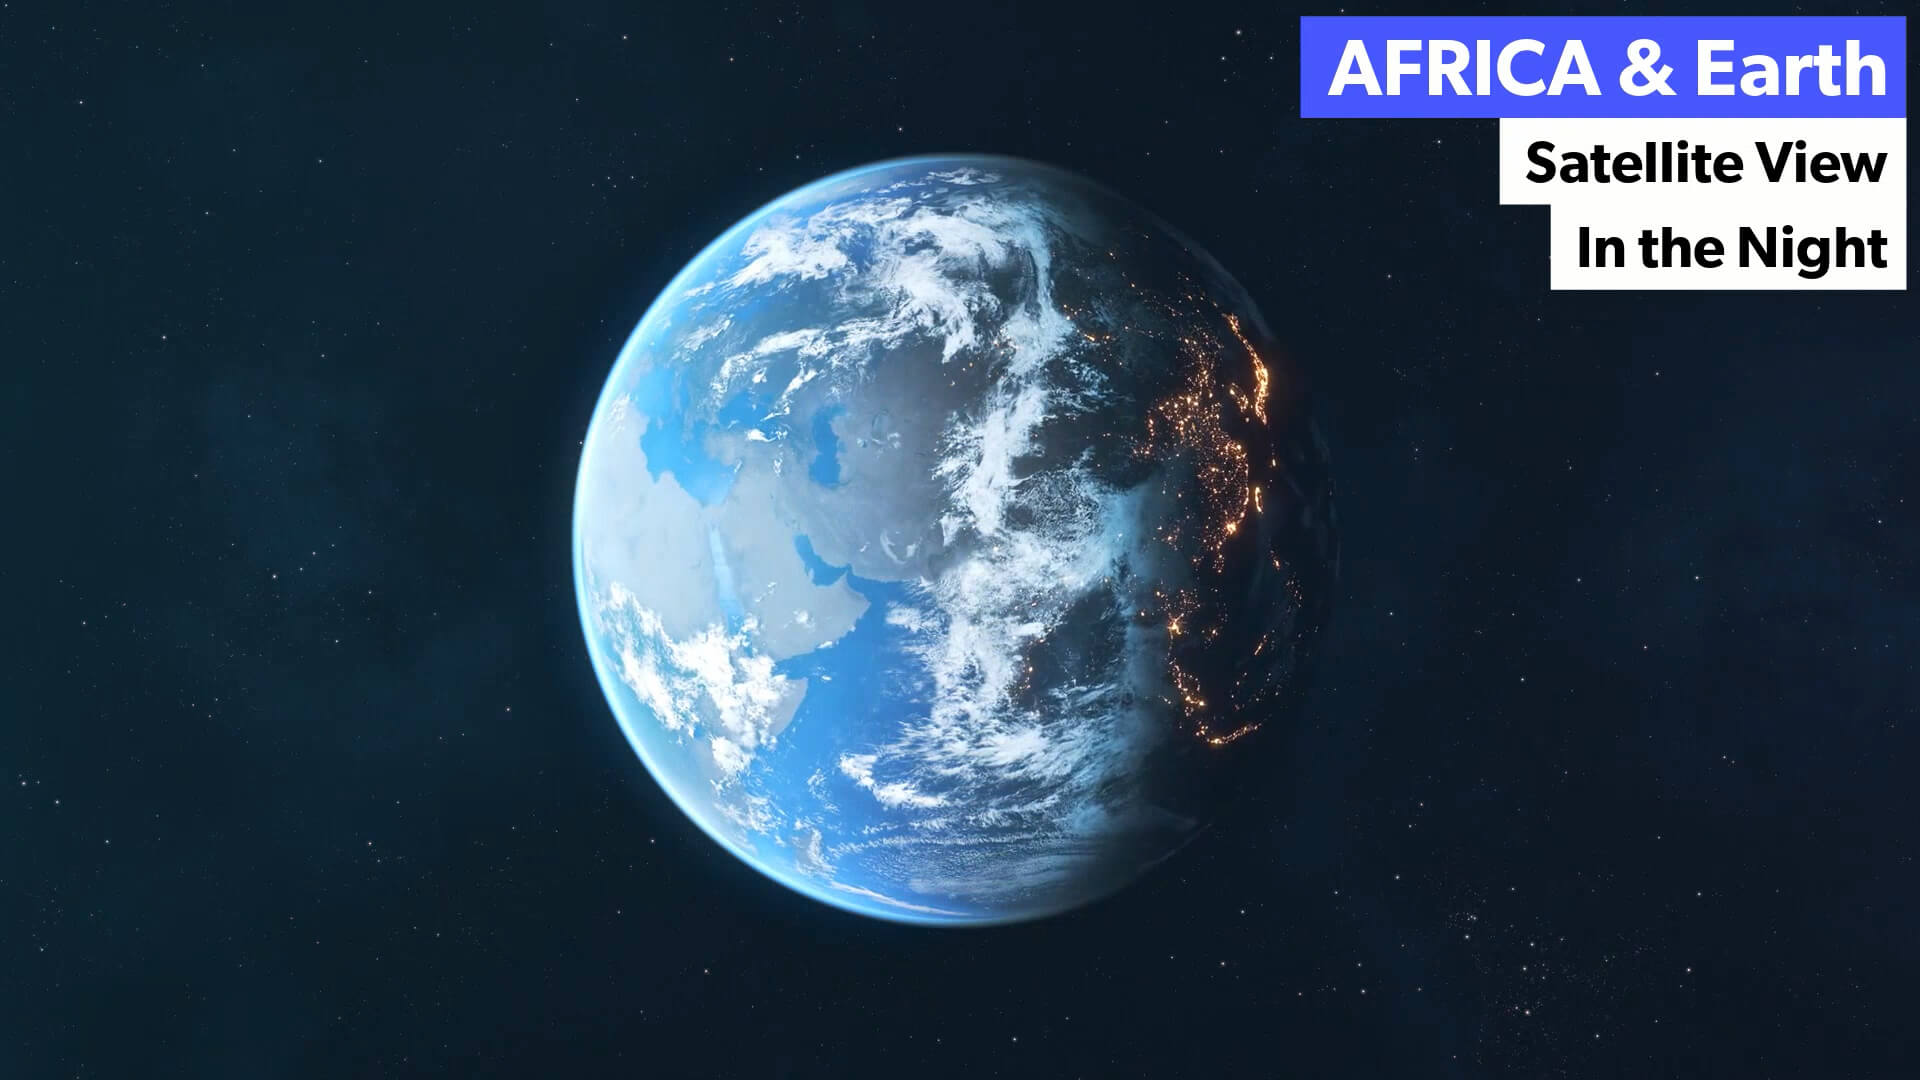 Africa and Earth Satellite View from Space